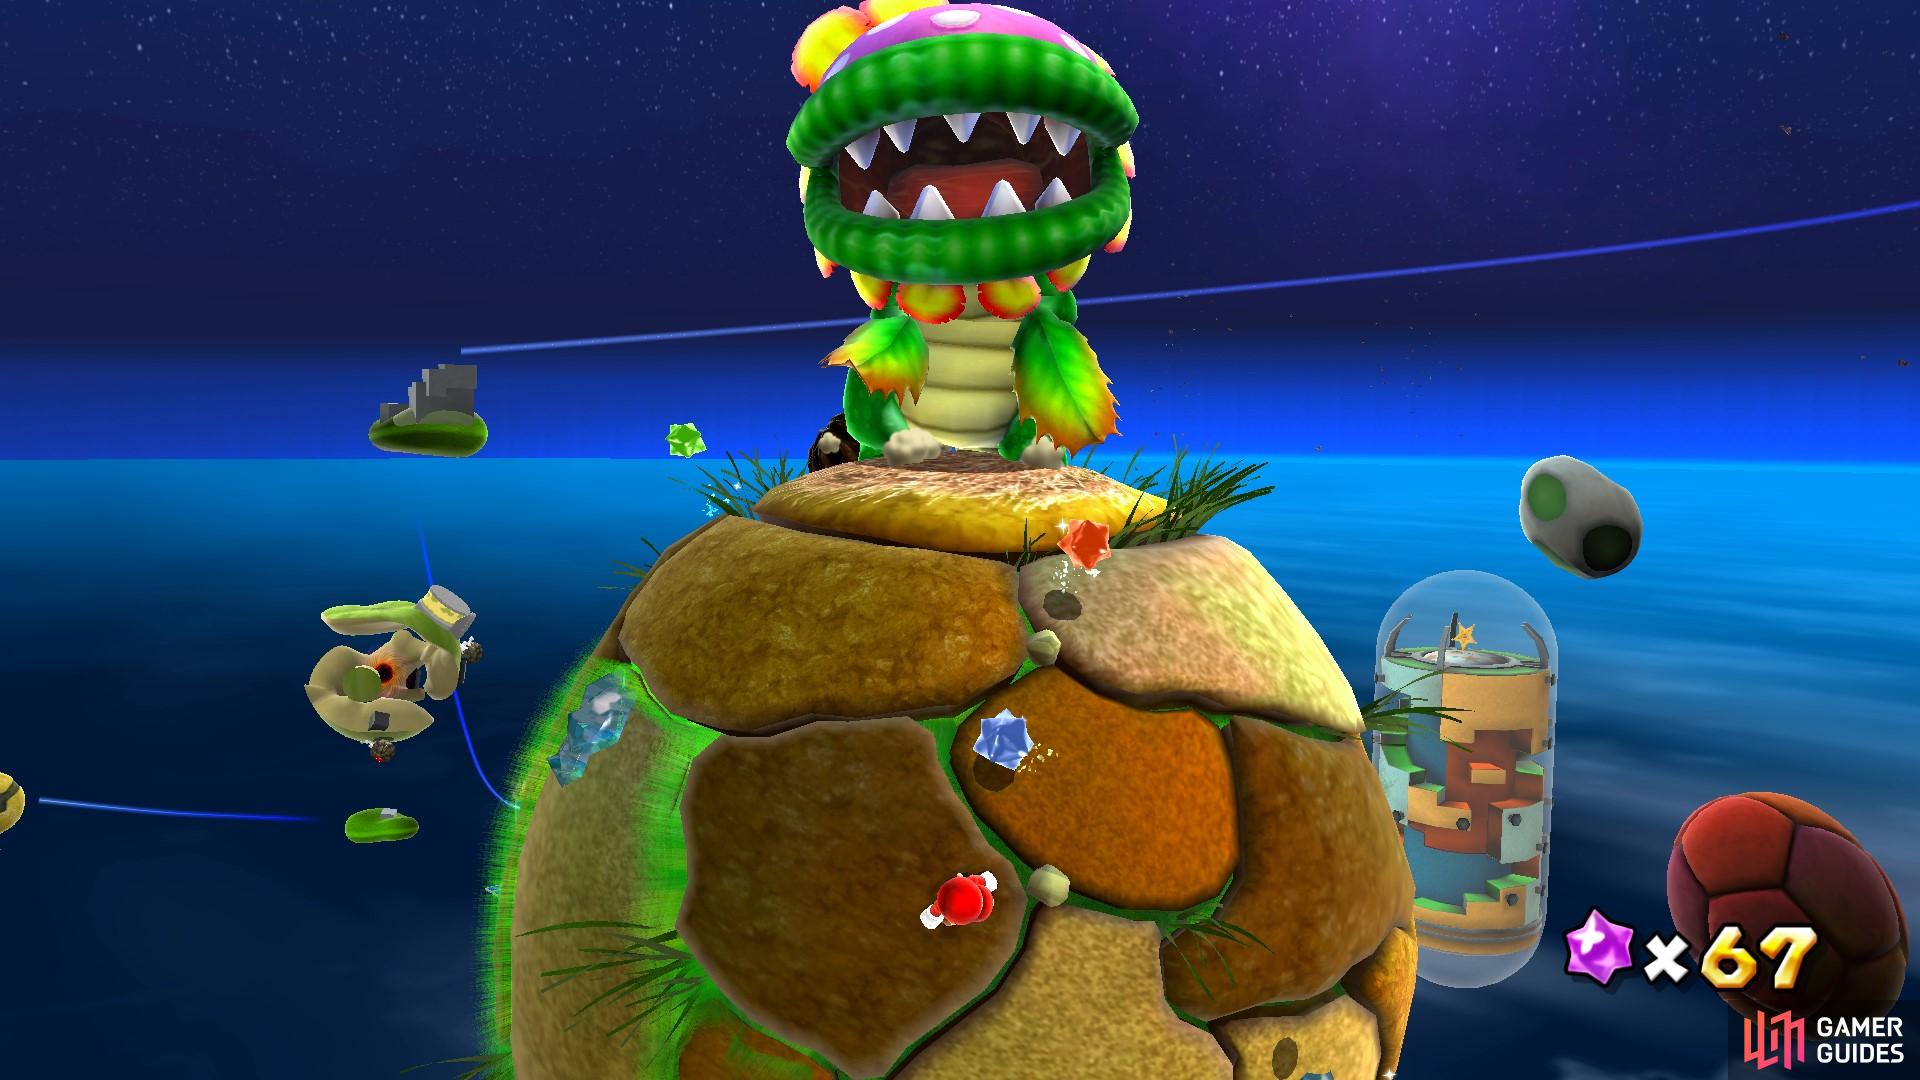 The Dino Piranha is the first boss you'll encounter in the game!